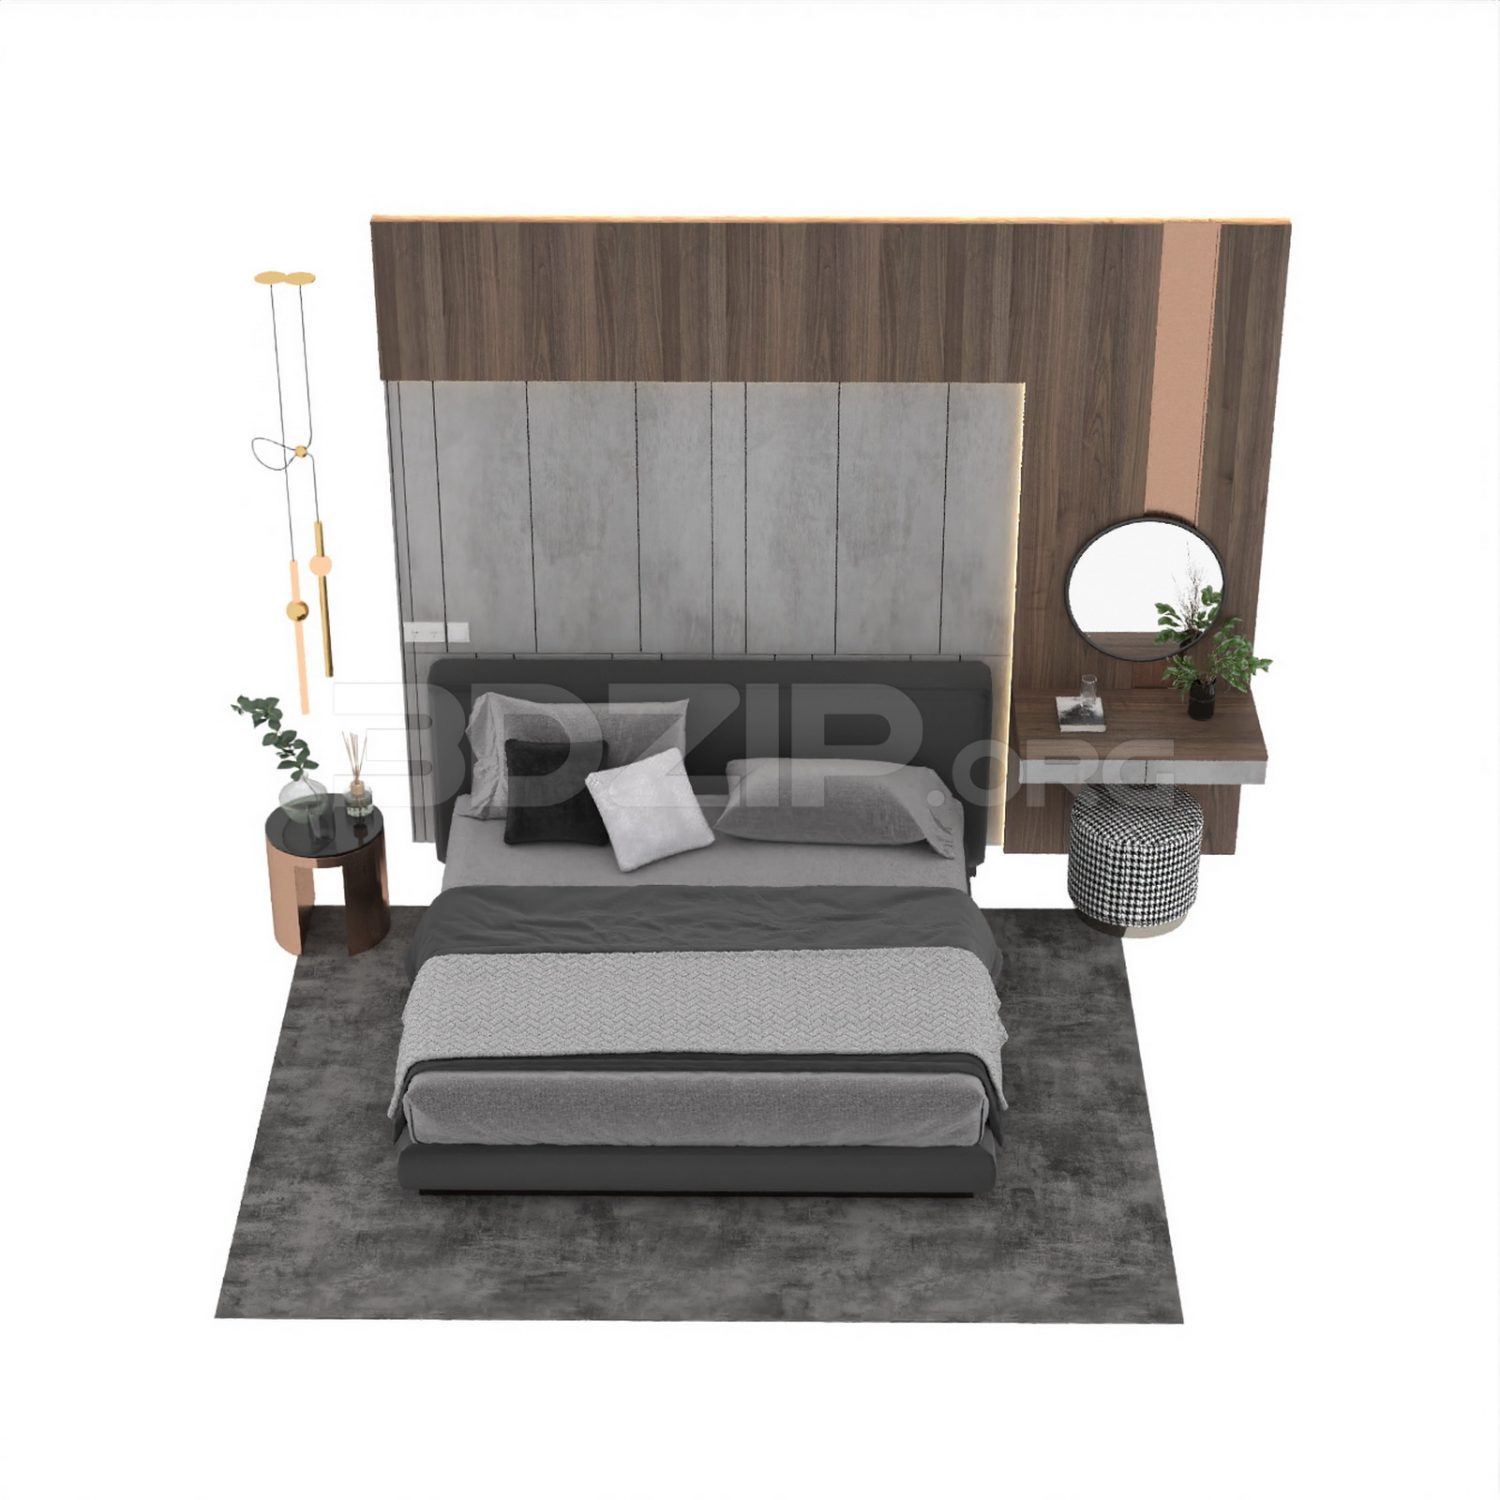 10526. Download Free Bed Model By Nguyen Huu Cong